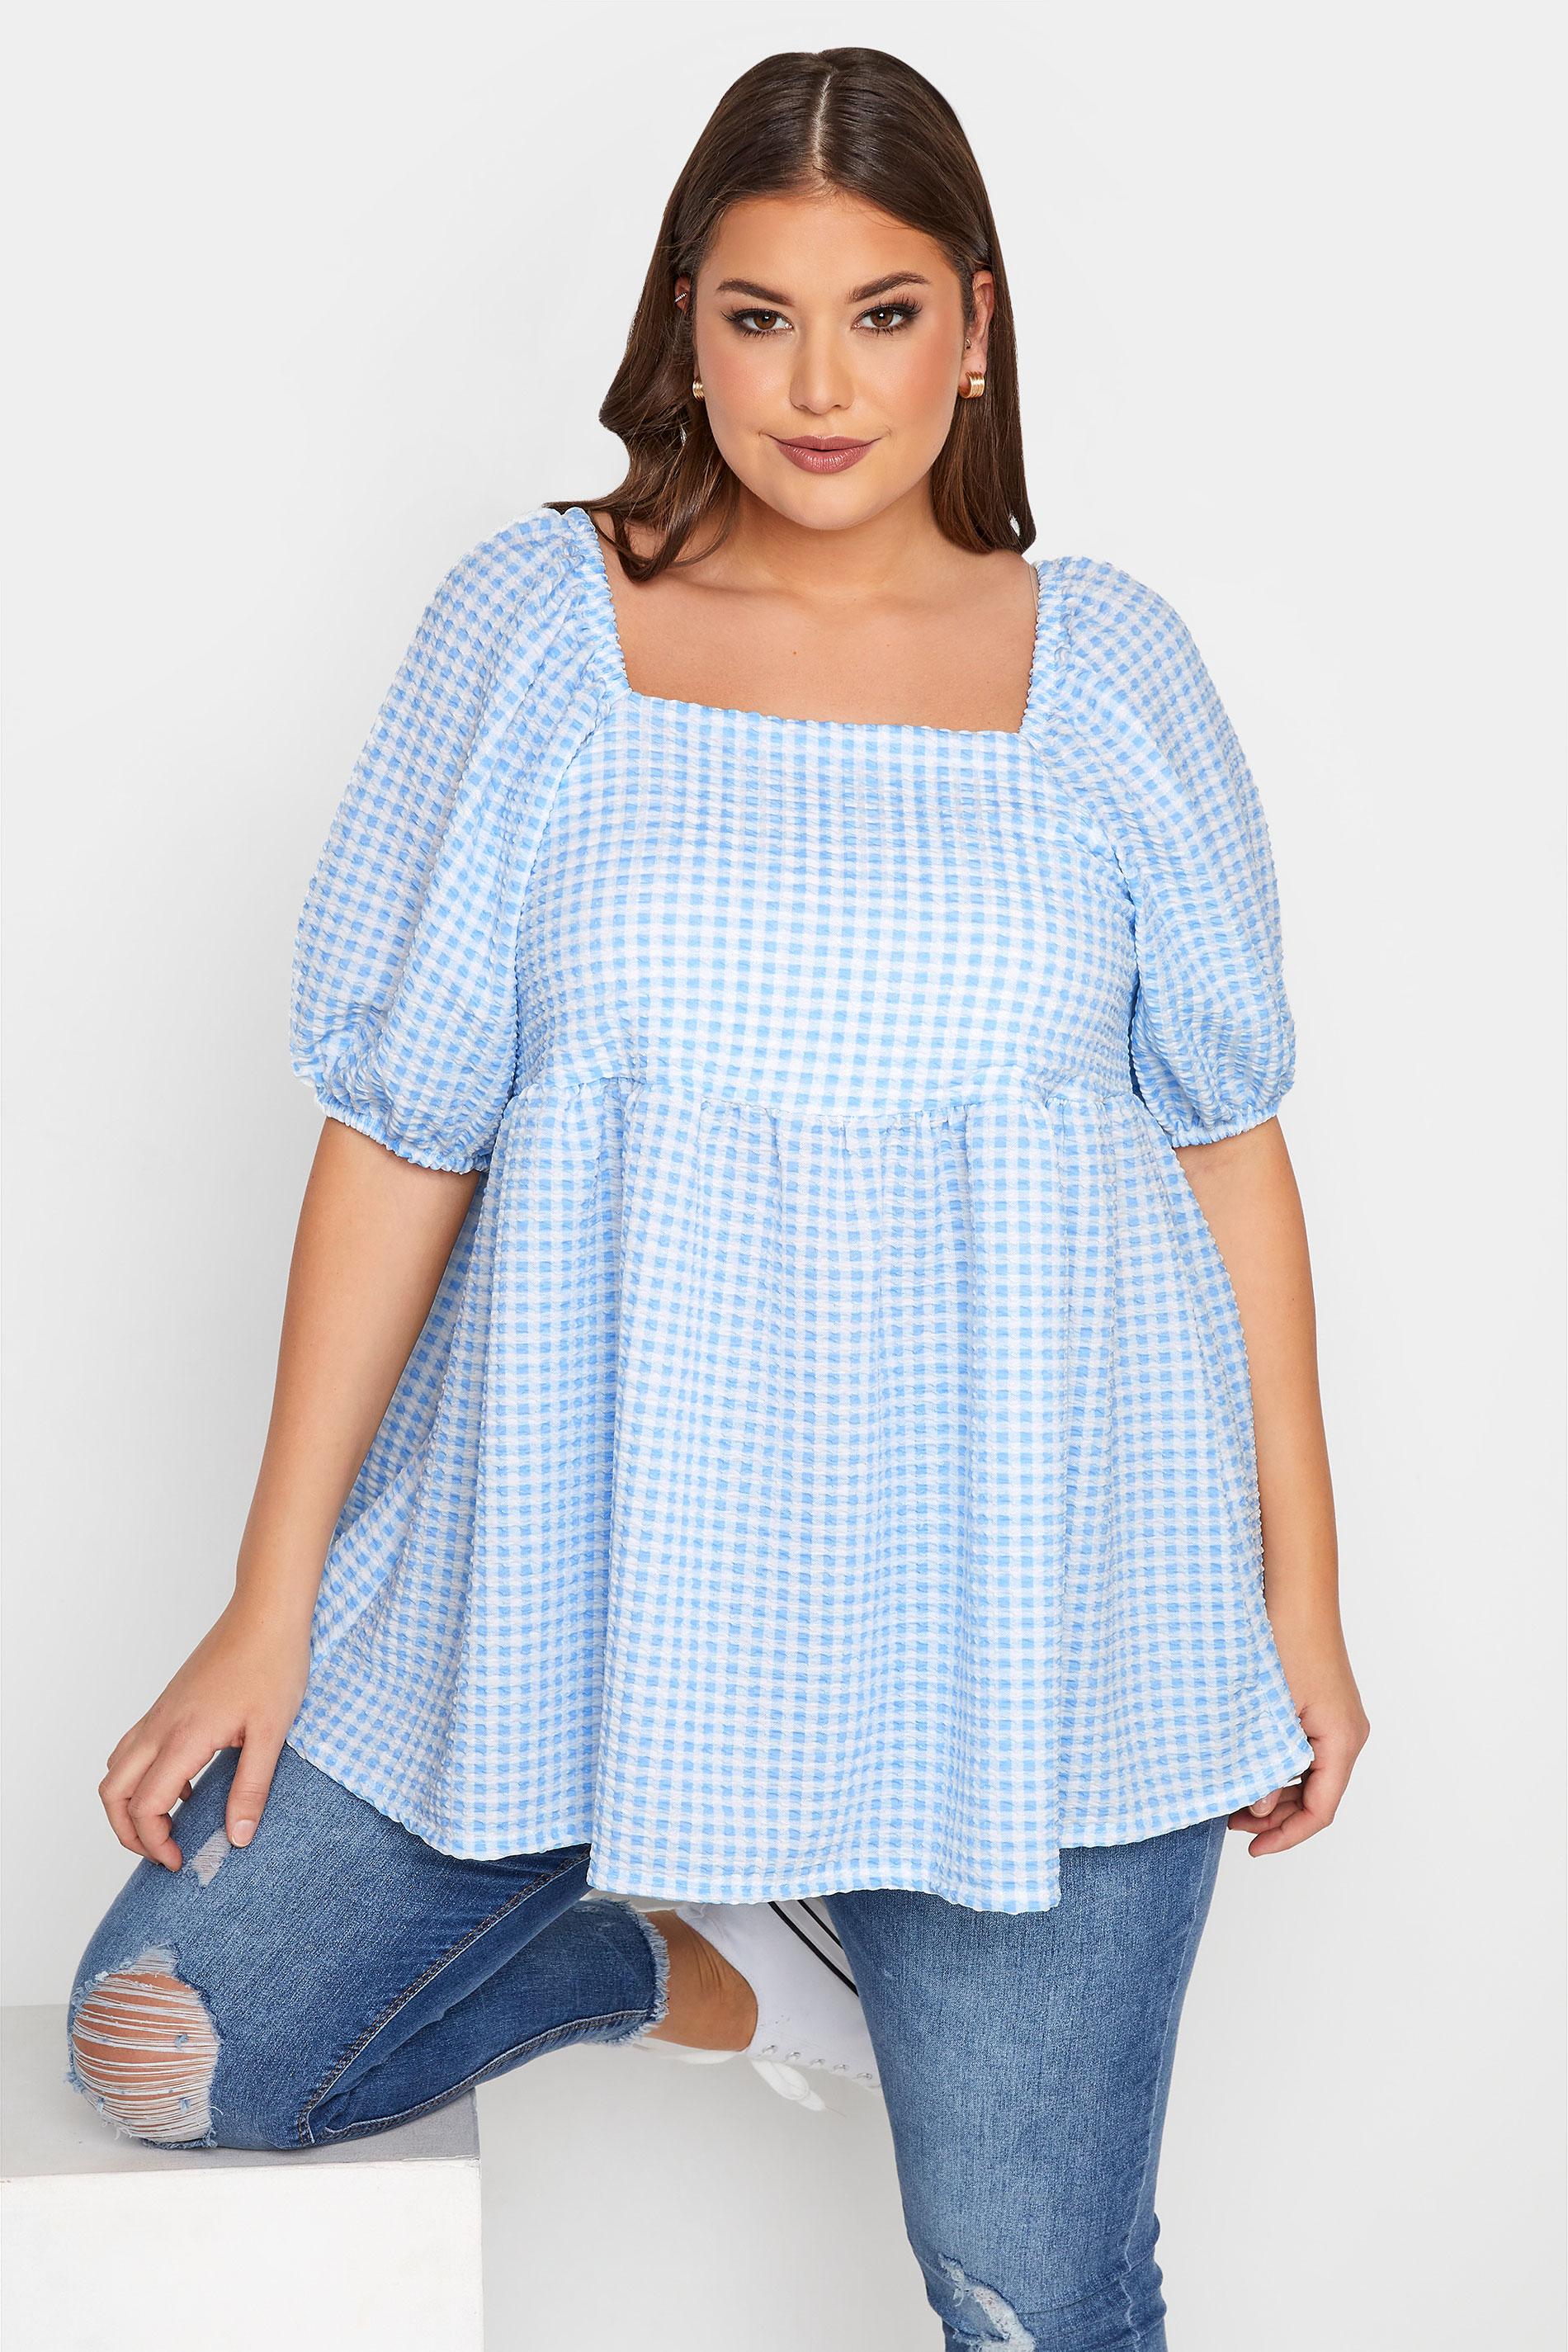 LIMITED COLLECTION Curve Blue Gingham Milkmaid Top 1